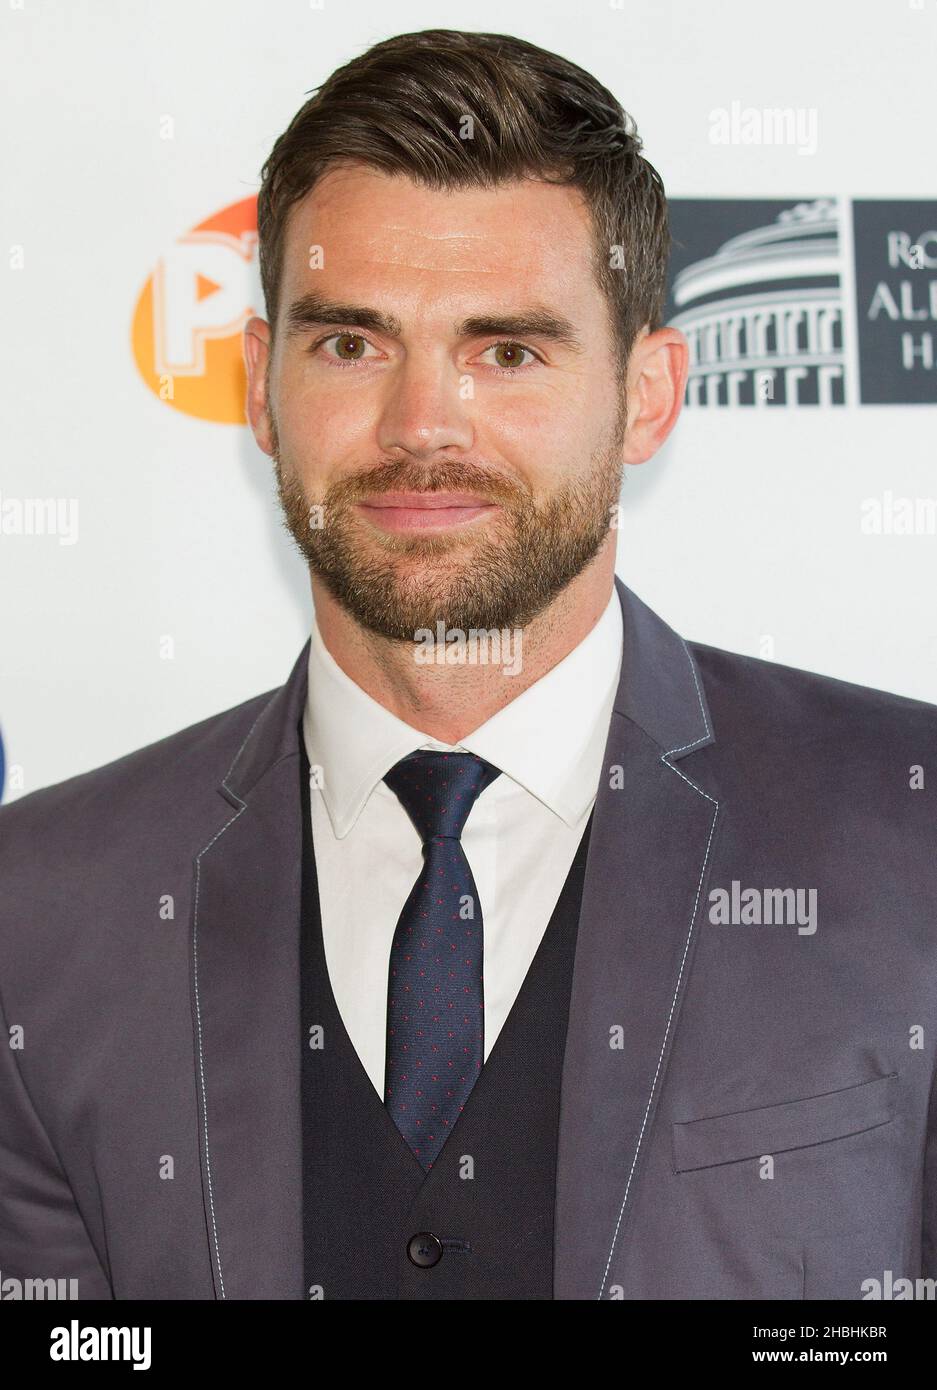 Jimmy Anderson cricketer attends the Nordoff Robbins 02 Silver Clef Awards at the London Hilton Park Lane Hotel in London. Stock Photo